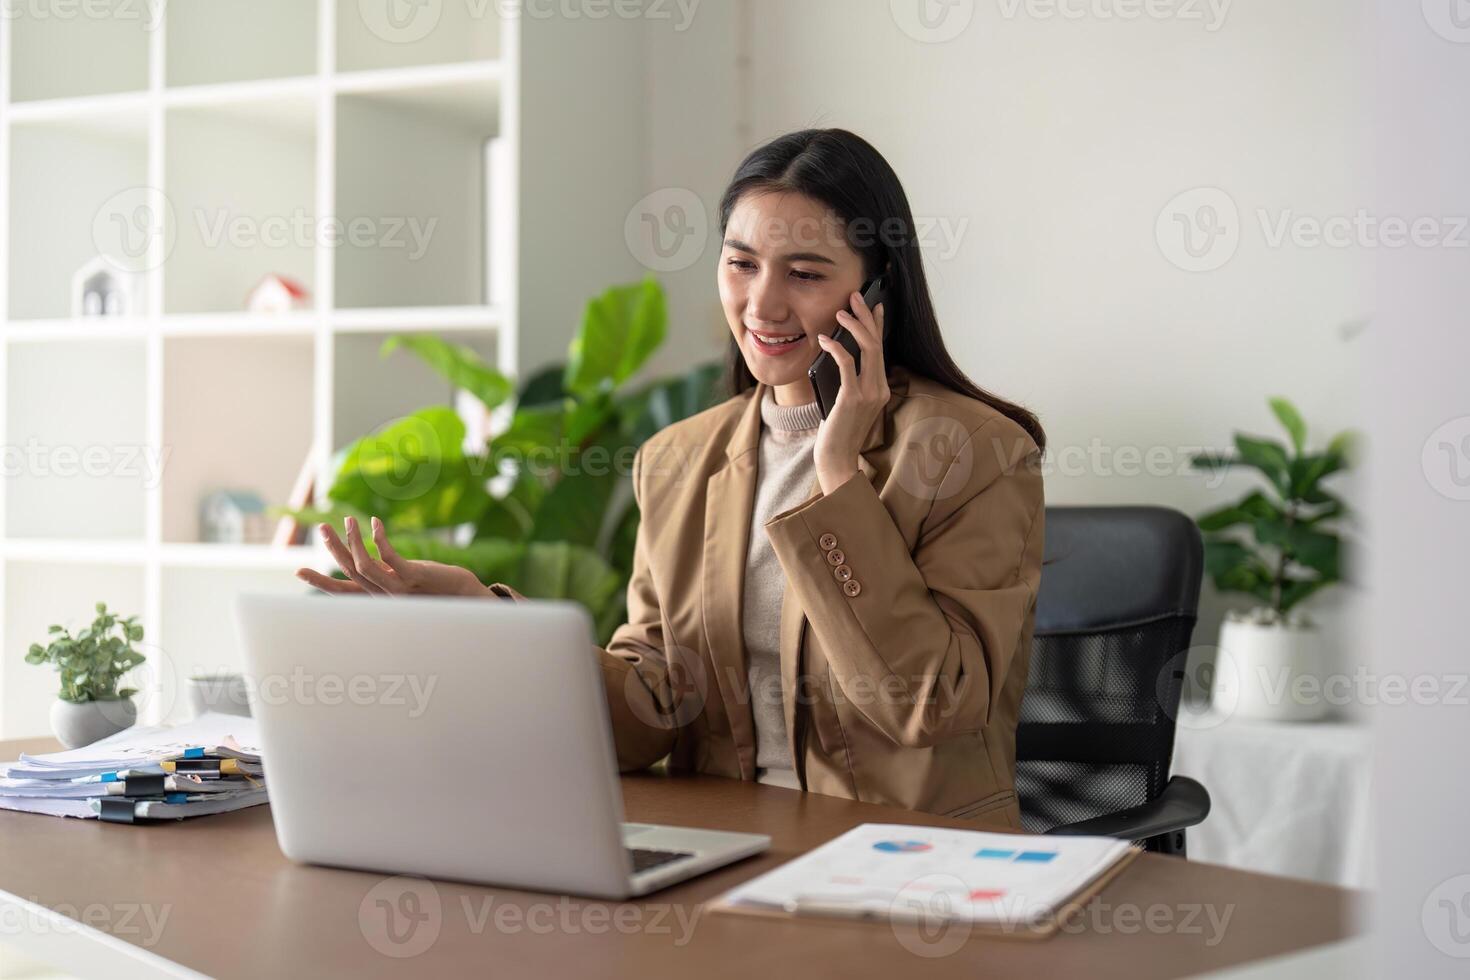 Work from home. Businesswoman using laptop computer and smartphone in her room. Eco friendly businesswoman working on desk, freelance, green room area, sustainable lifestyle concept photo